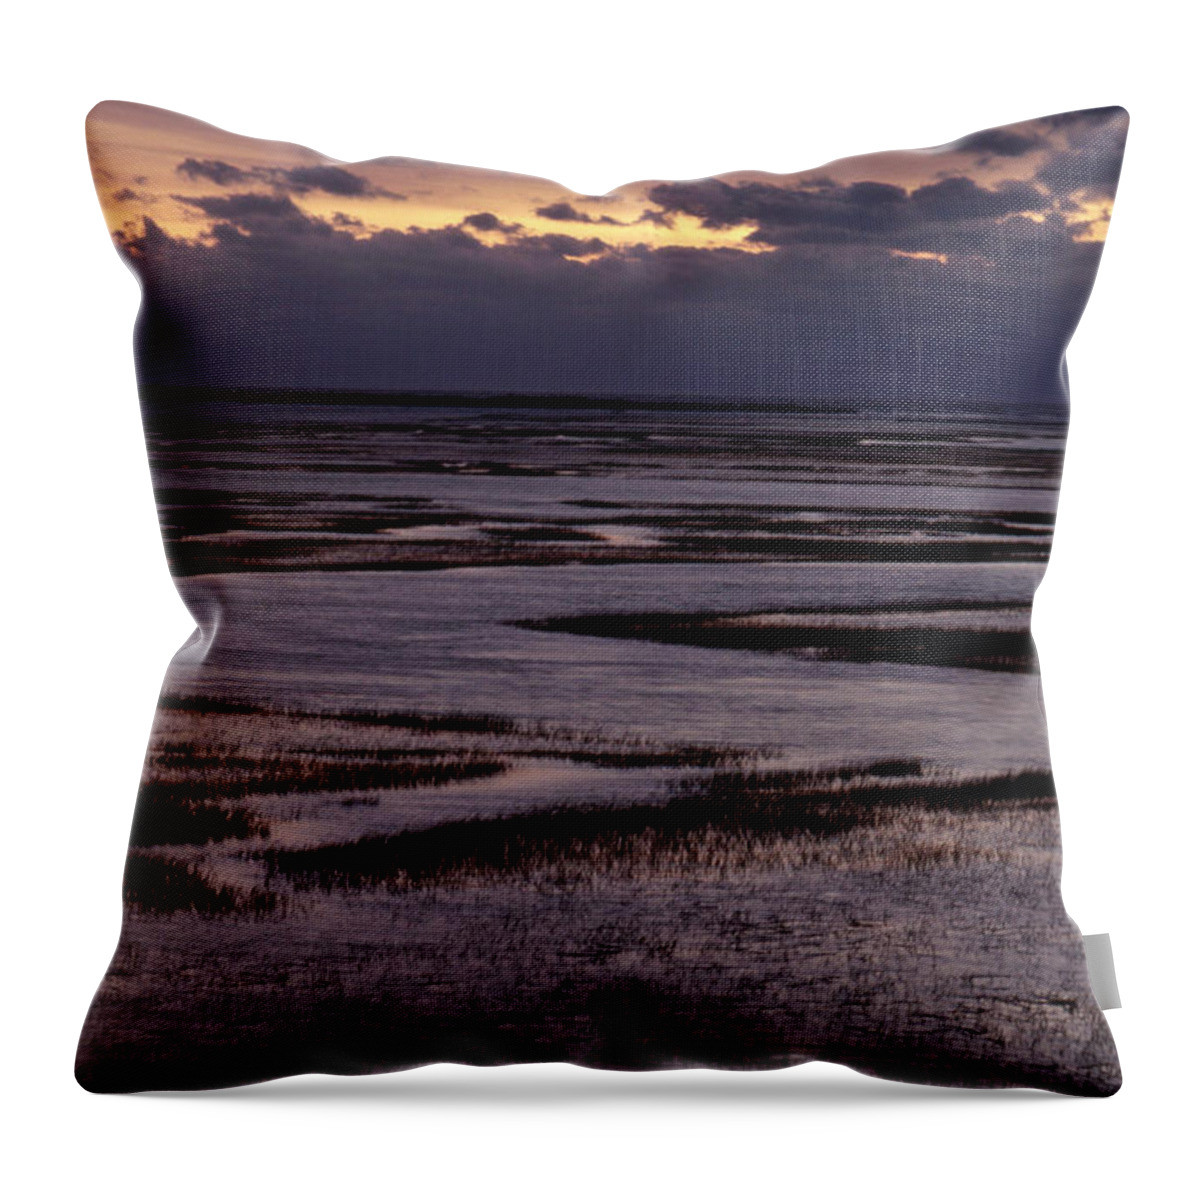 North Inlet Throw Pillow featuring the photograph South Carolina Marsh At Sunrise by Larry Cameron